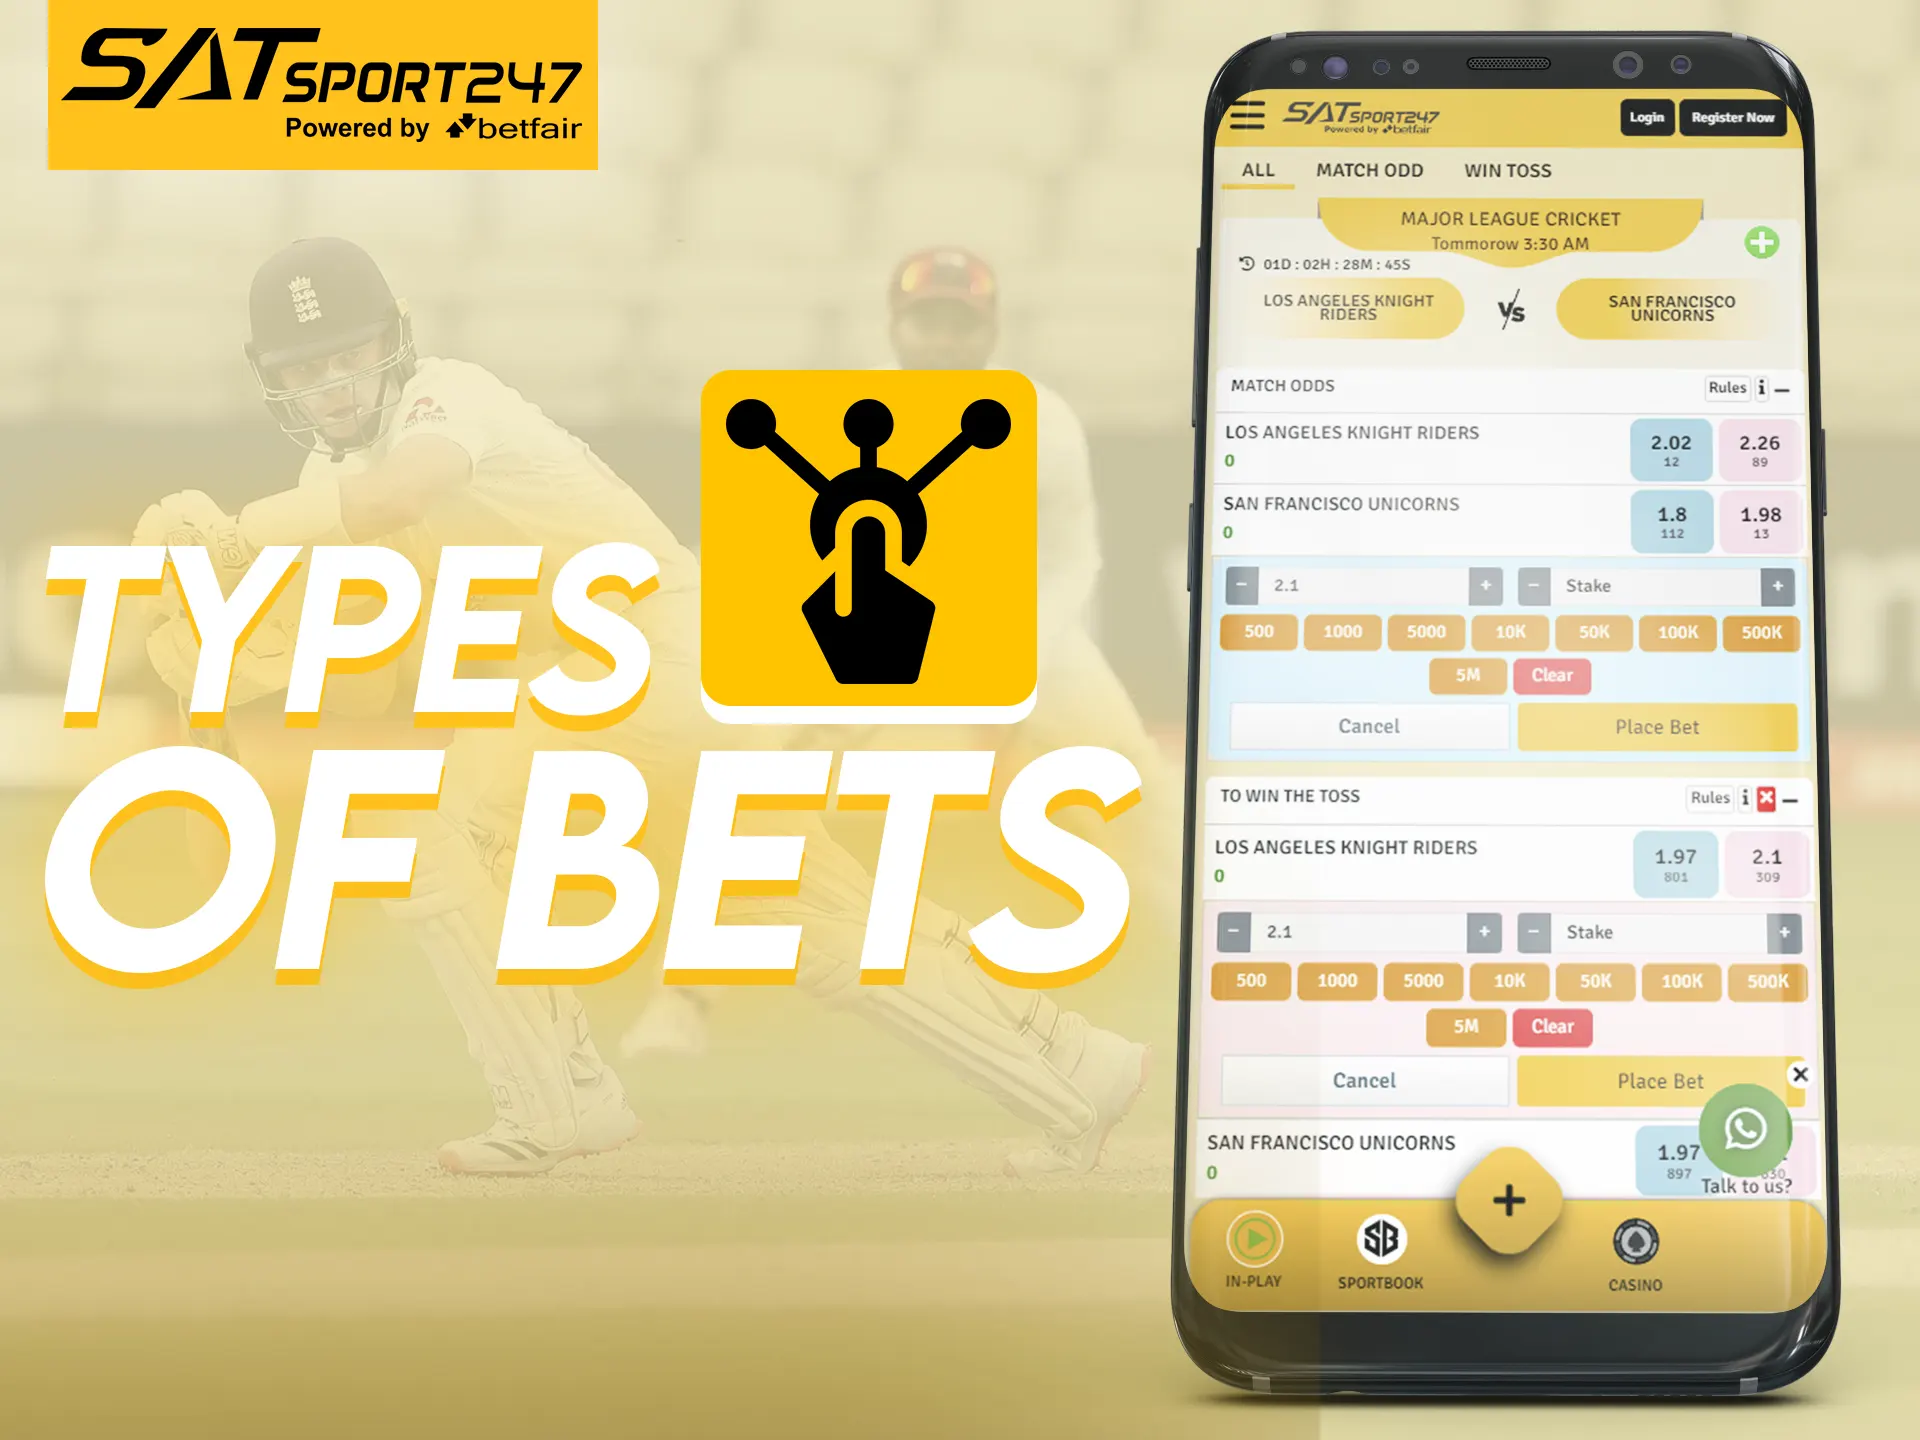 Different types of bets are available to you in the Satsport247 app.